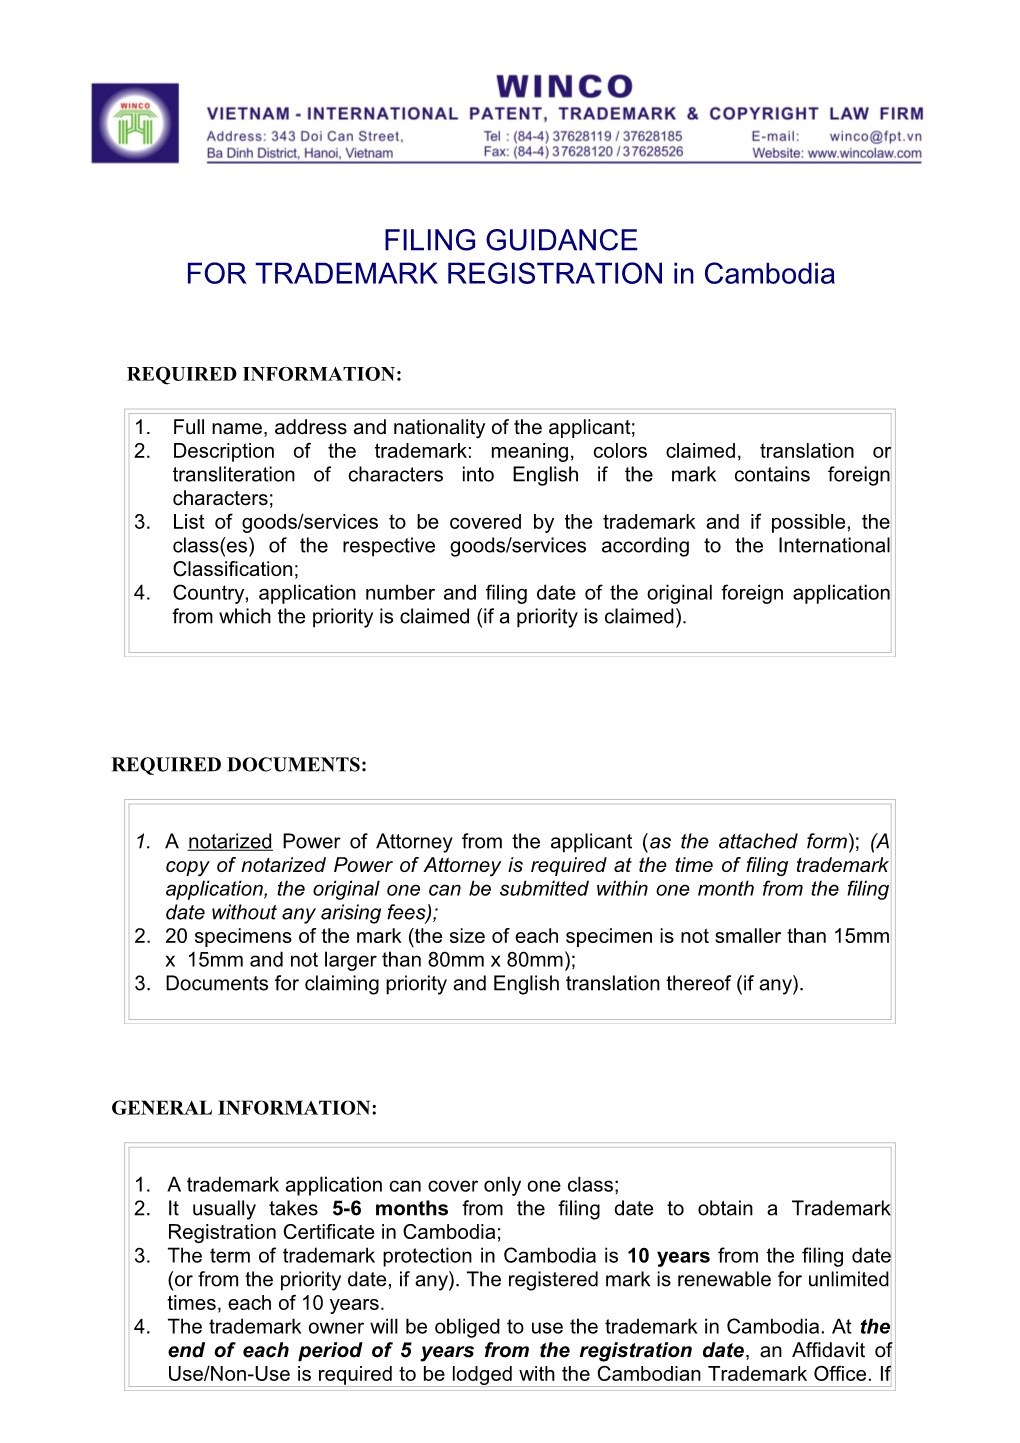 Patent for Inventions, Utility Solutions in Vietnam